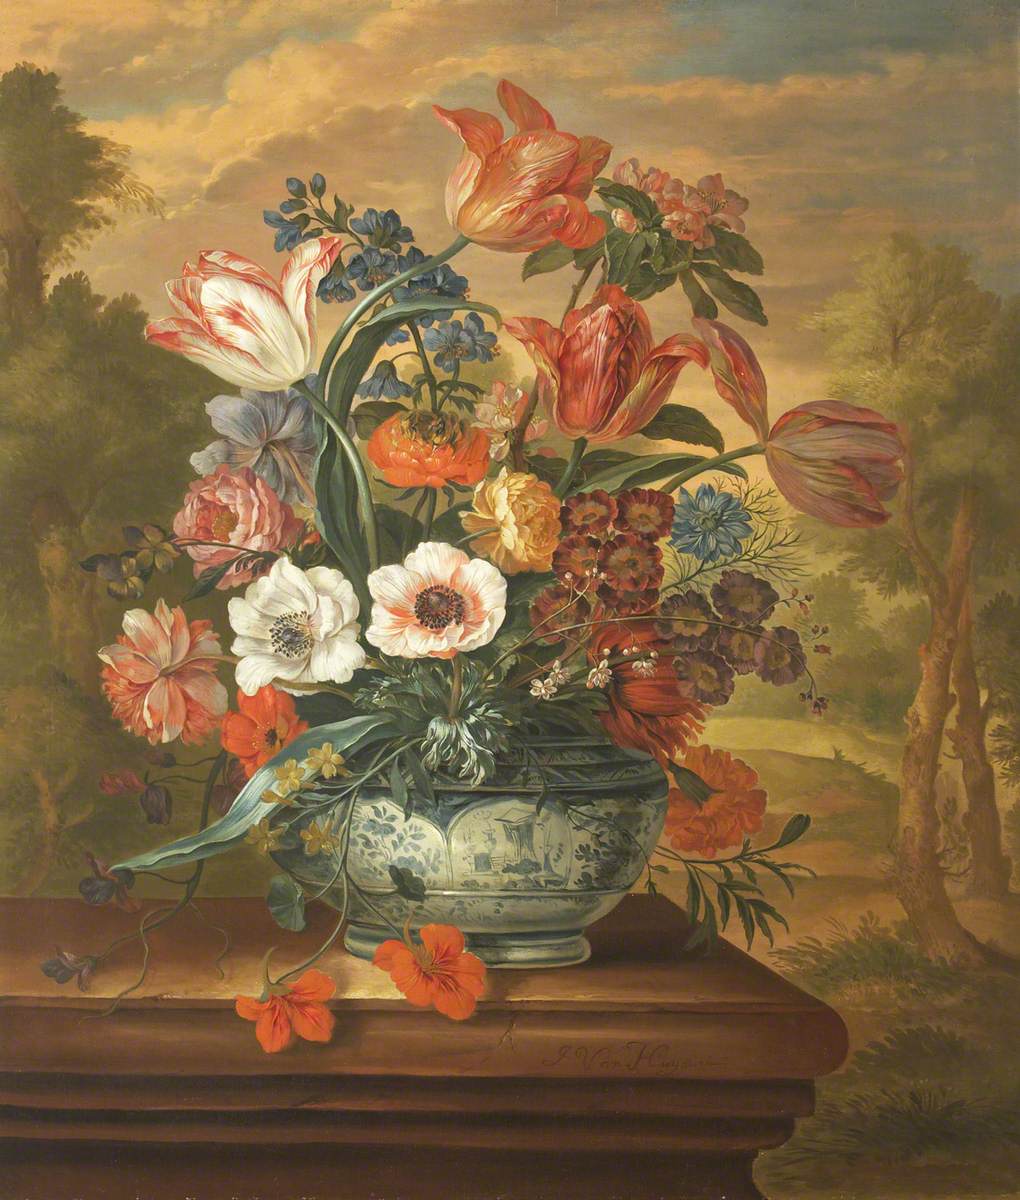 A Delftware Vase of Tulips, Anemones, Roses, and Other Flowers on a Stone Ledge in a Landscape